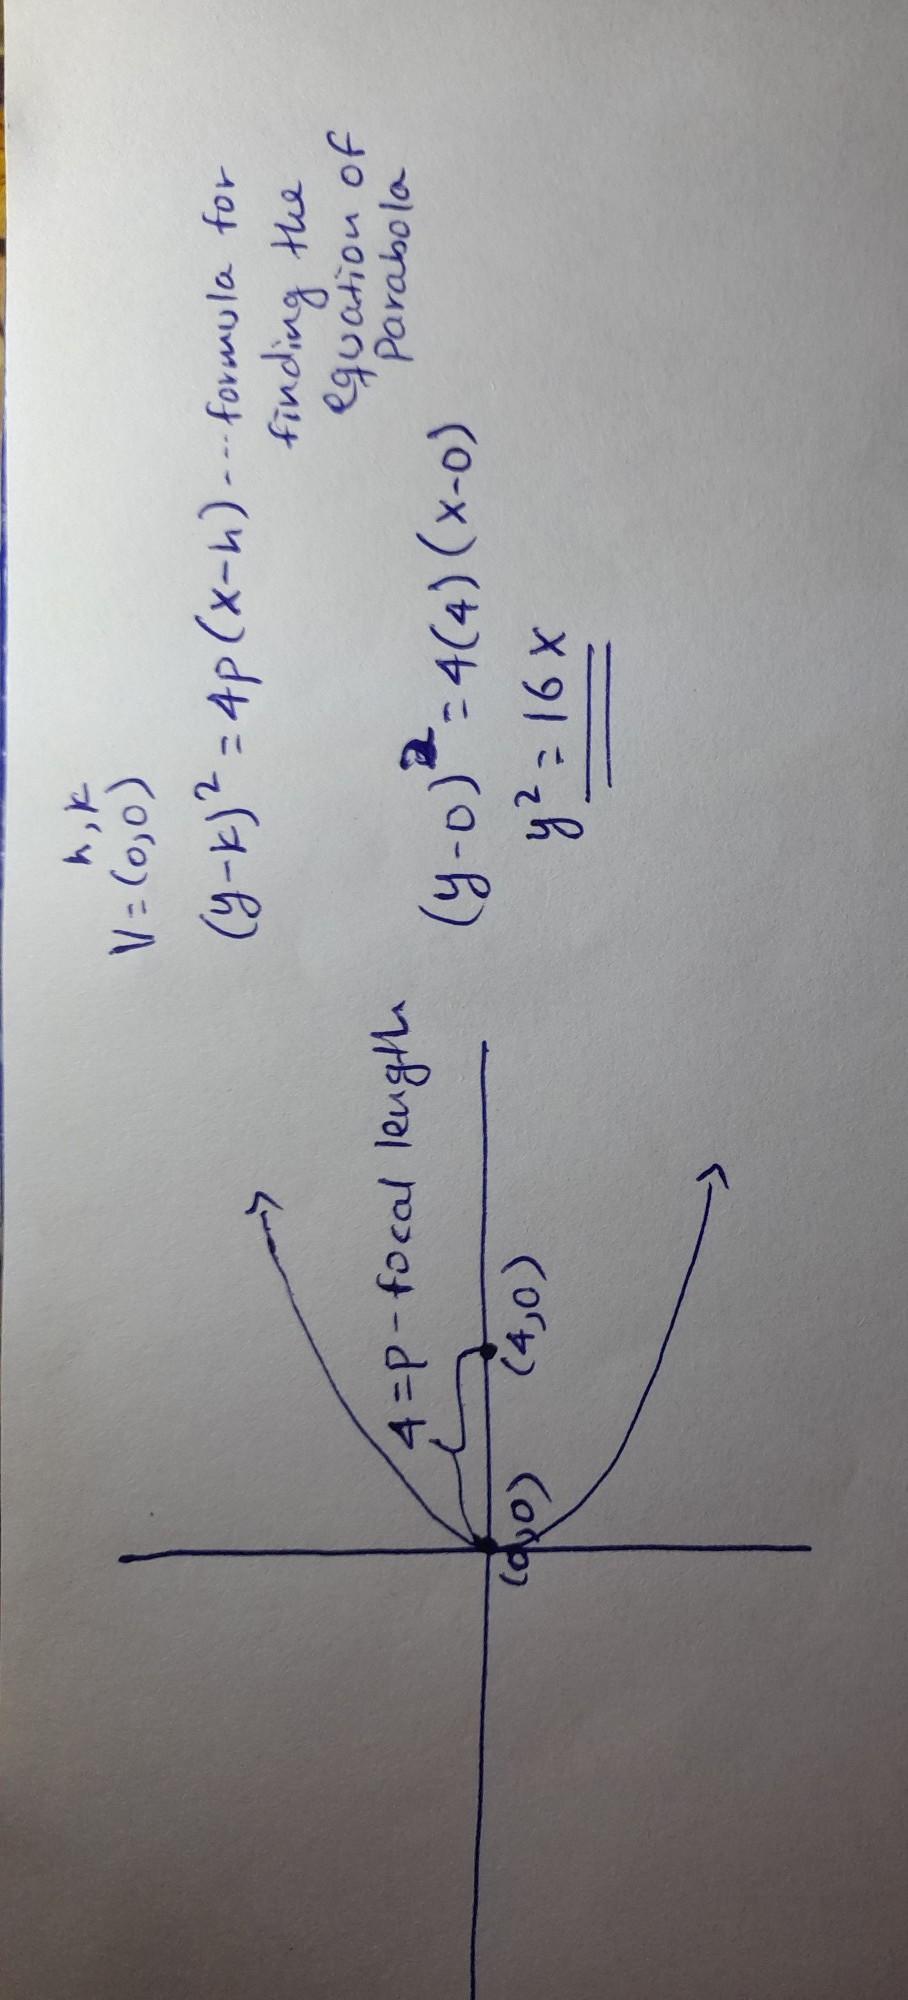 PLS HELP ASAP I WILL GIVE BRAINLIESTFind The Equation Of A Parabola With Focus (4,0) And Vertexat The